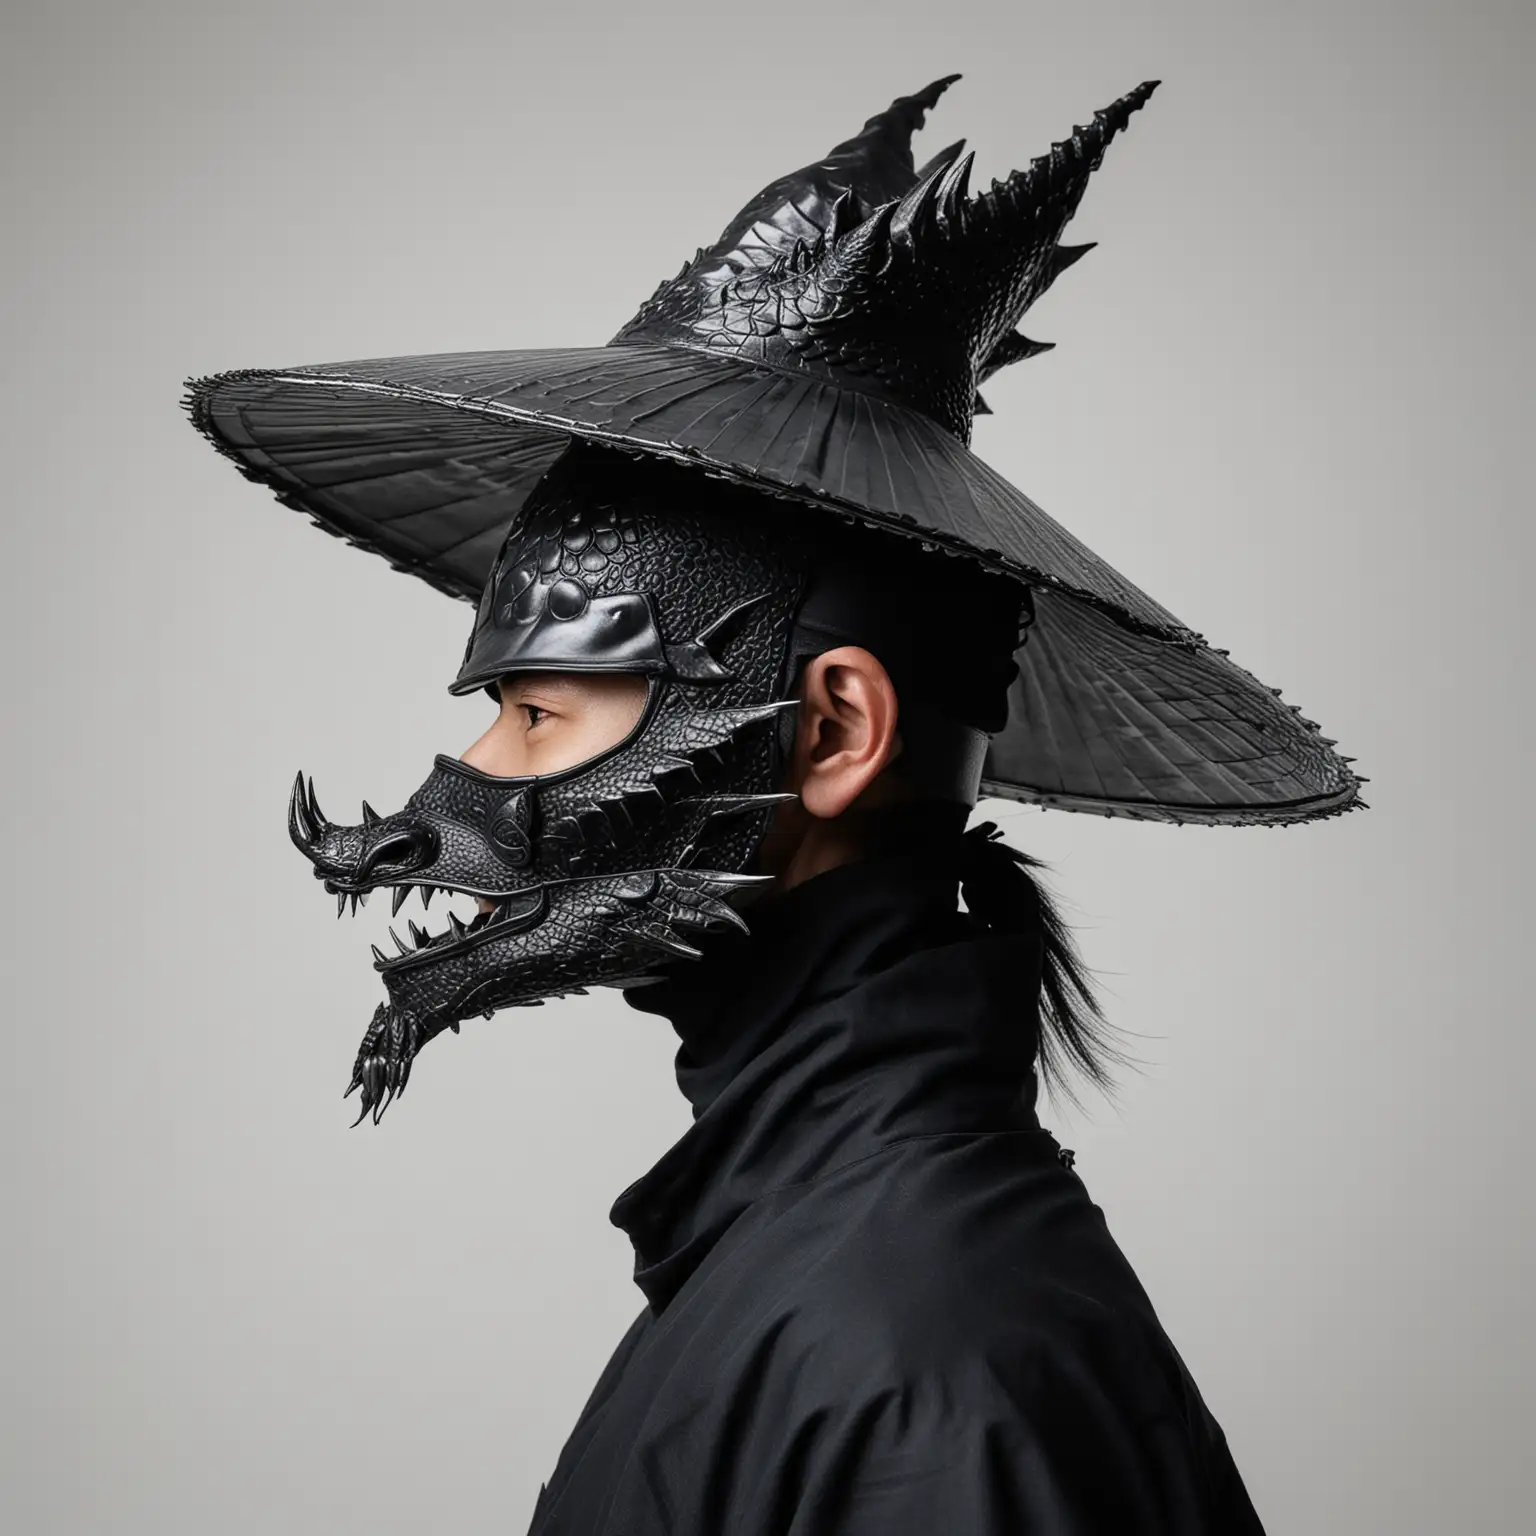 Japanese Man in Black Metal Conical Hat and DragonNinja Mask Portrait